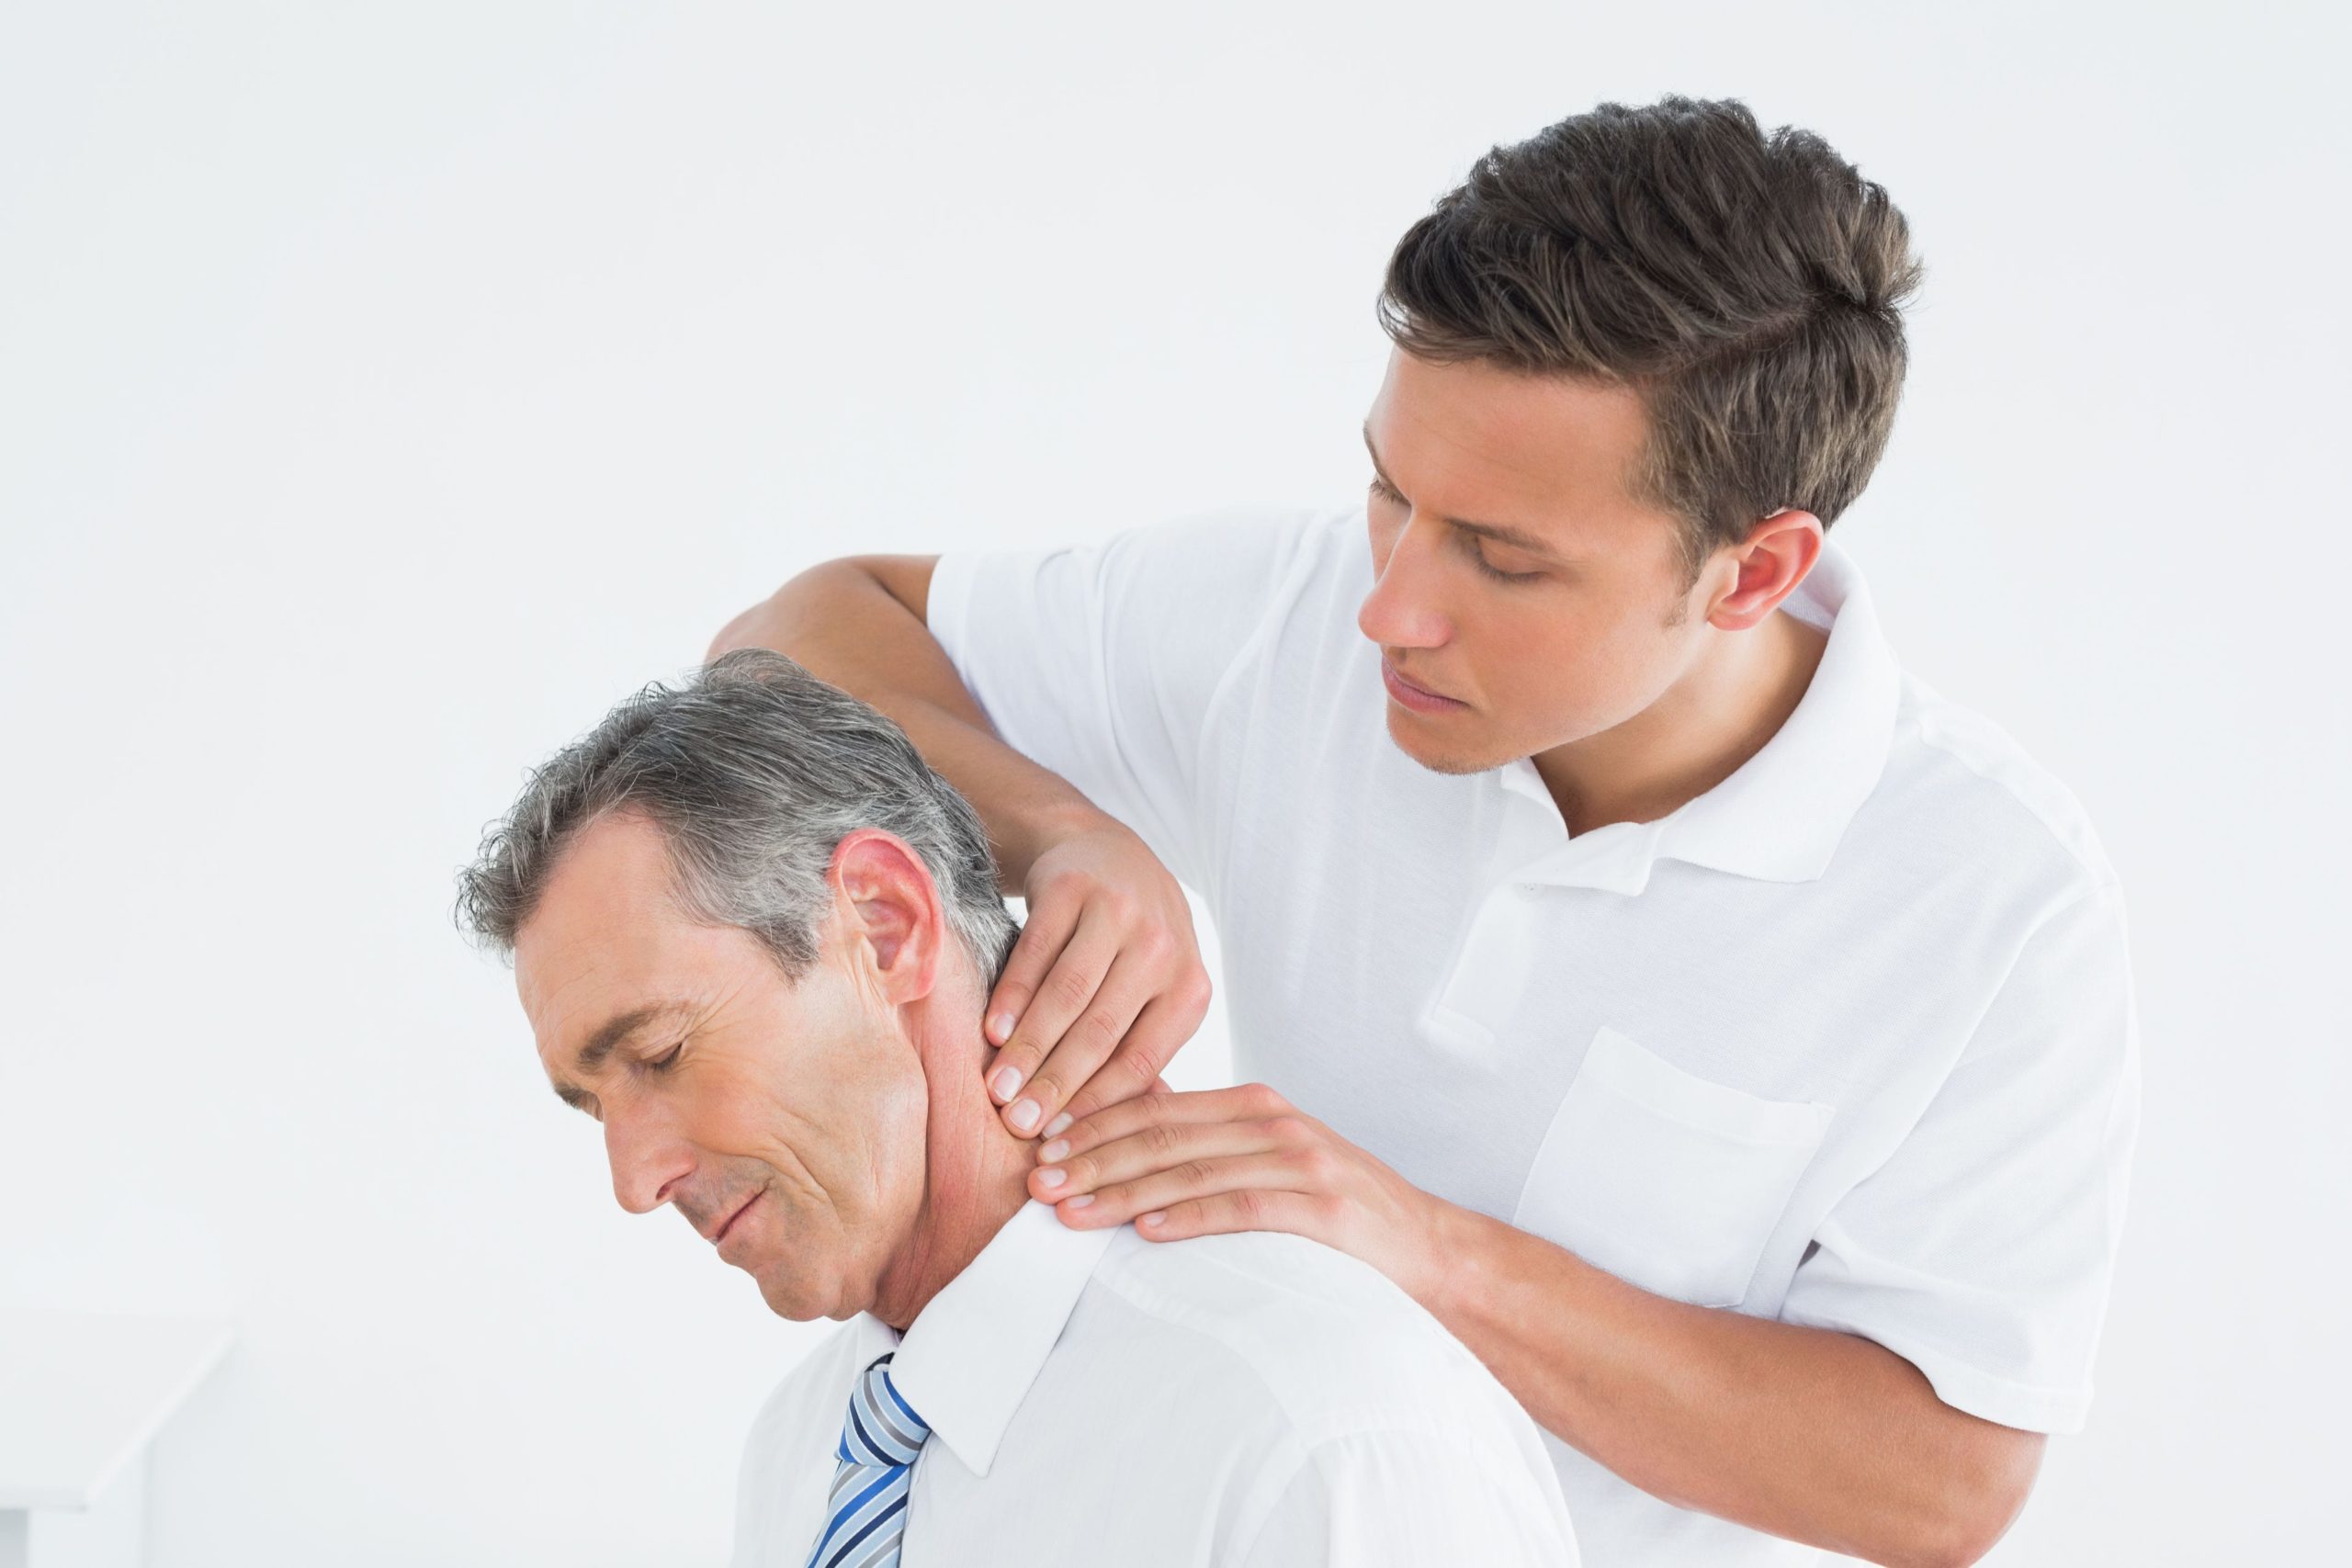 Why Chiropractic Is Great for Treating Work Injuries